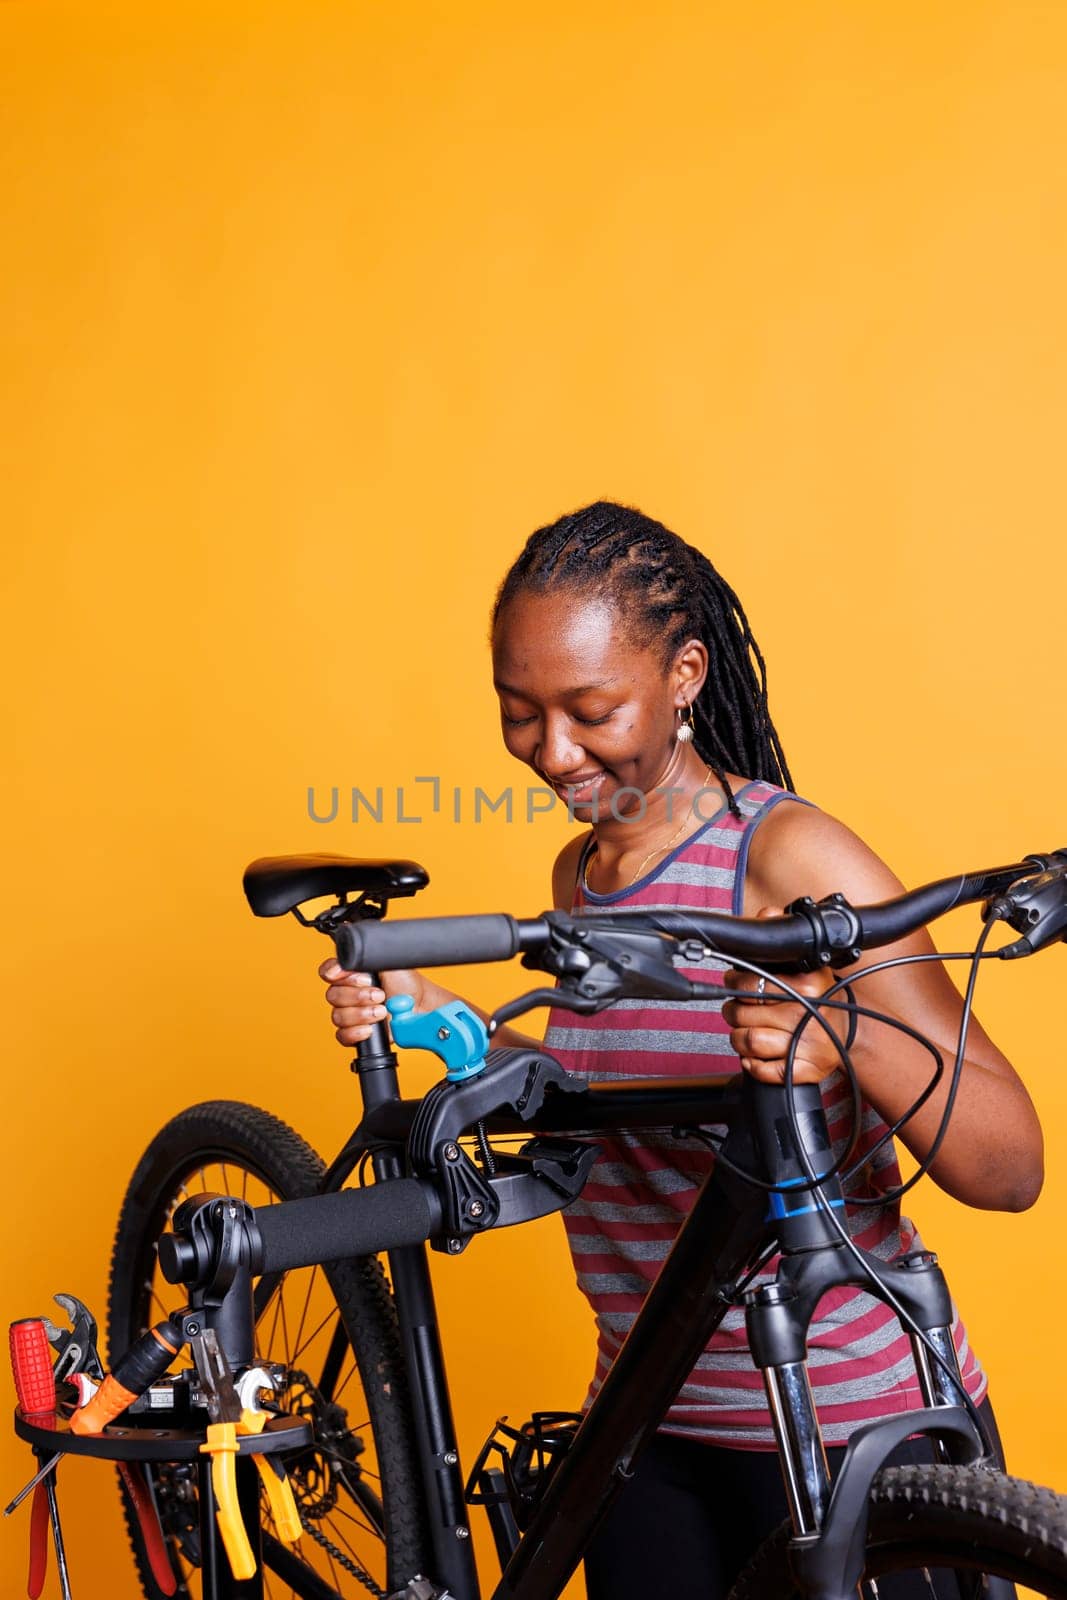 Lady Secures Bike for Yearly Maintenance by DCStudio